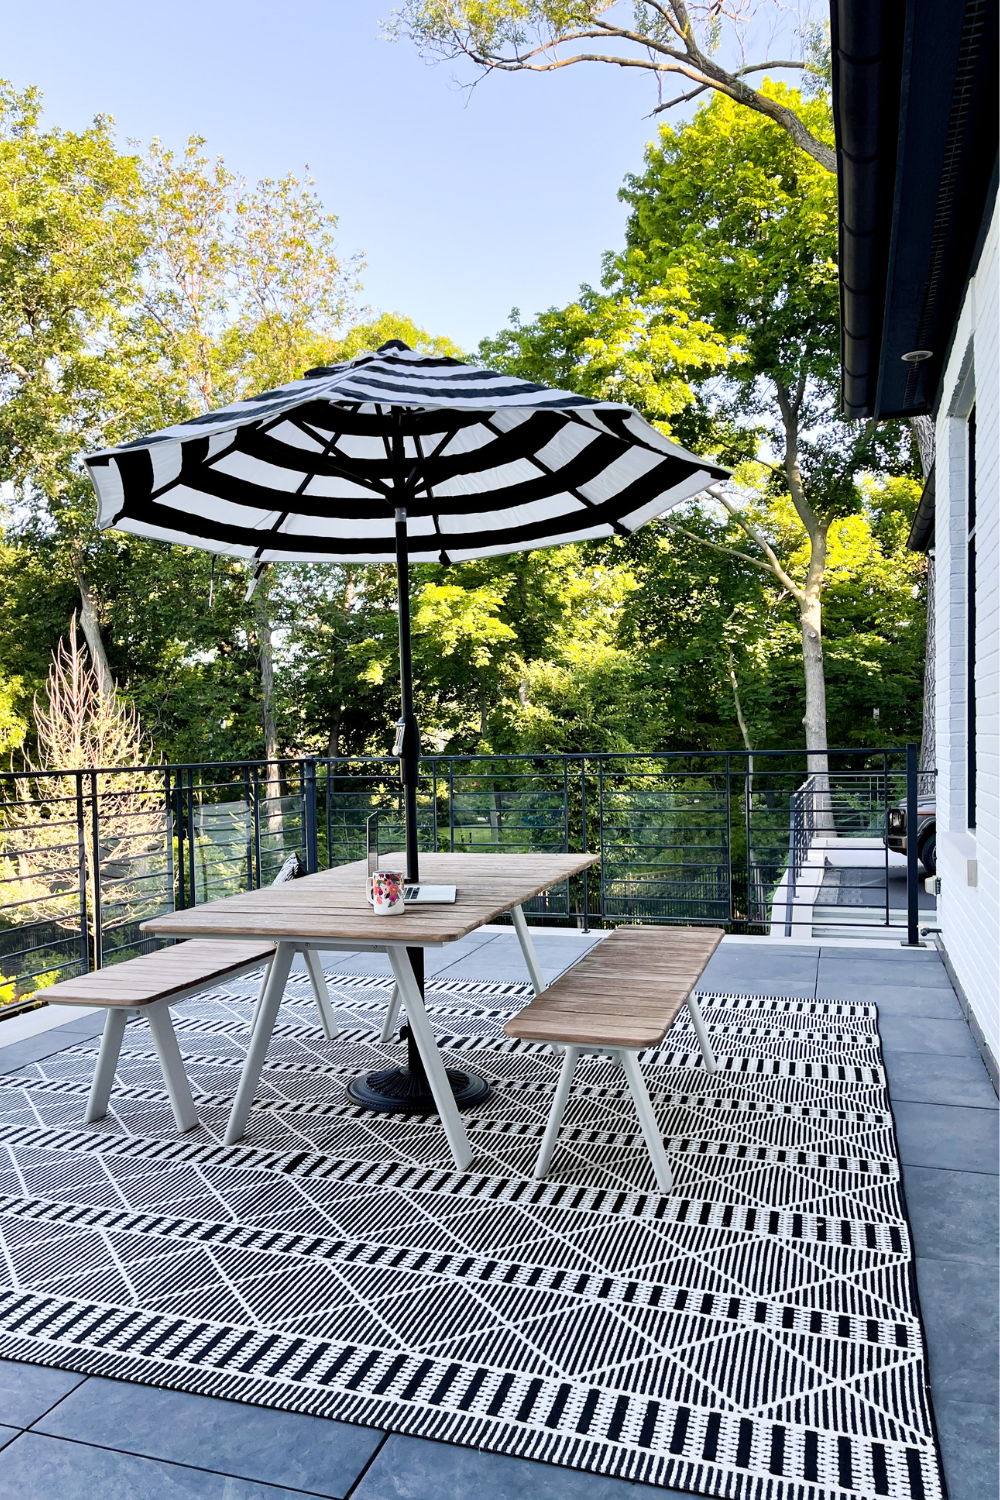 Balcony styling: picnic table, black and white rug, umbrella